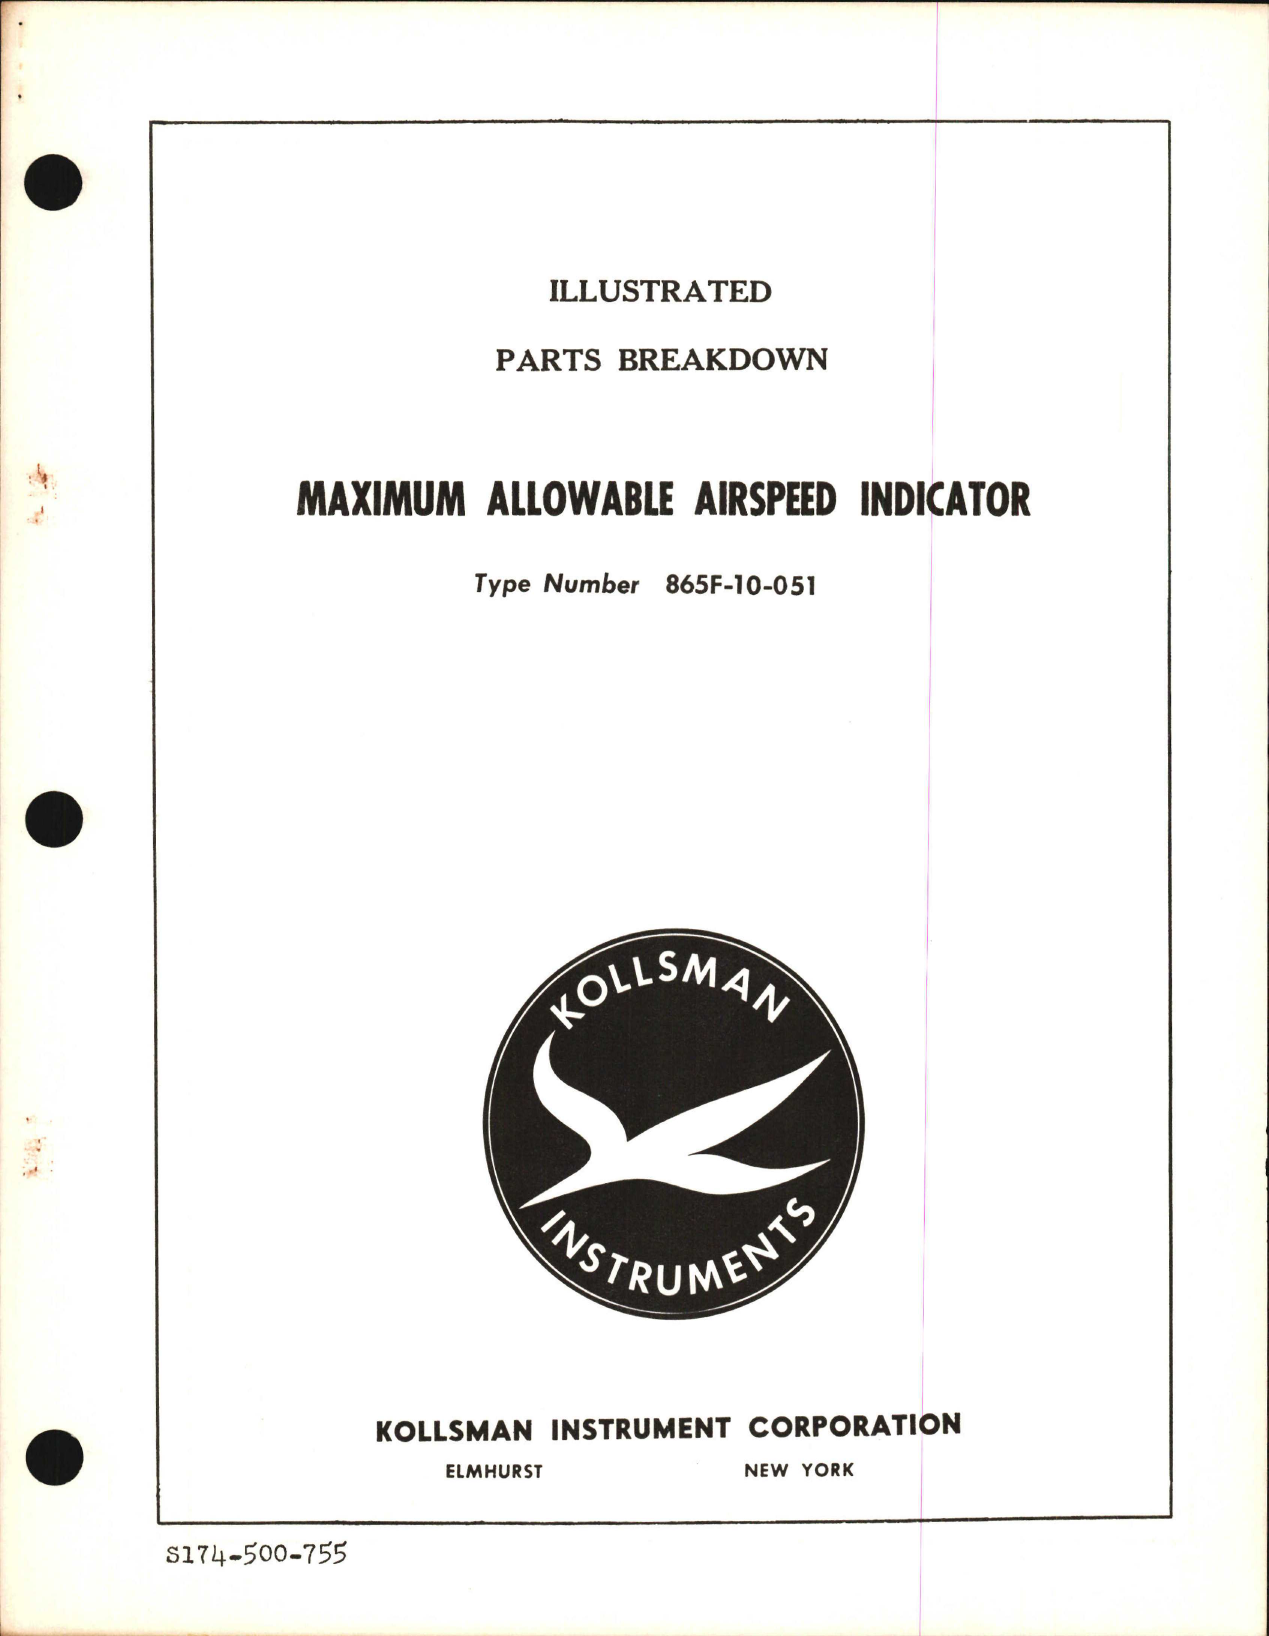 Sample page 1 from AirCorps Library document: Illustrated Parts Breakdown for Maximum Allowable Airspeed Indicator 